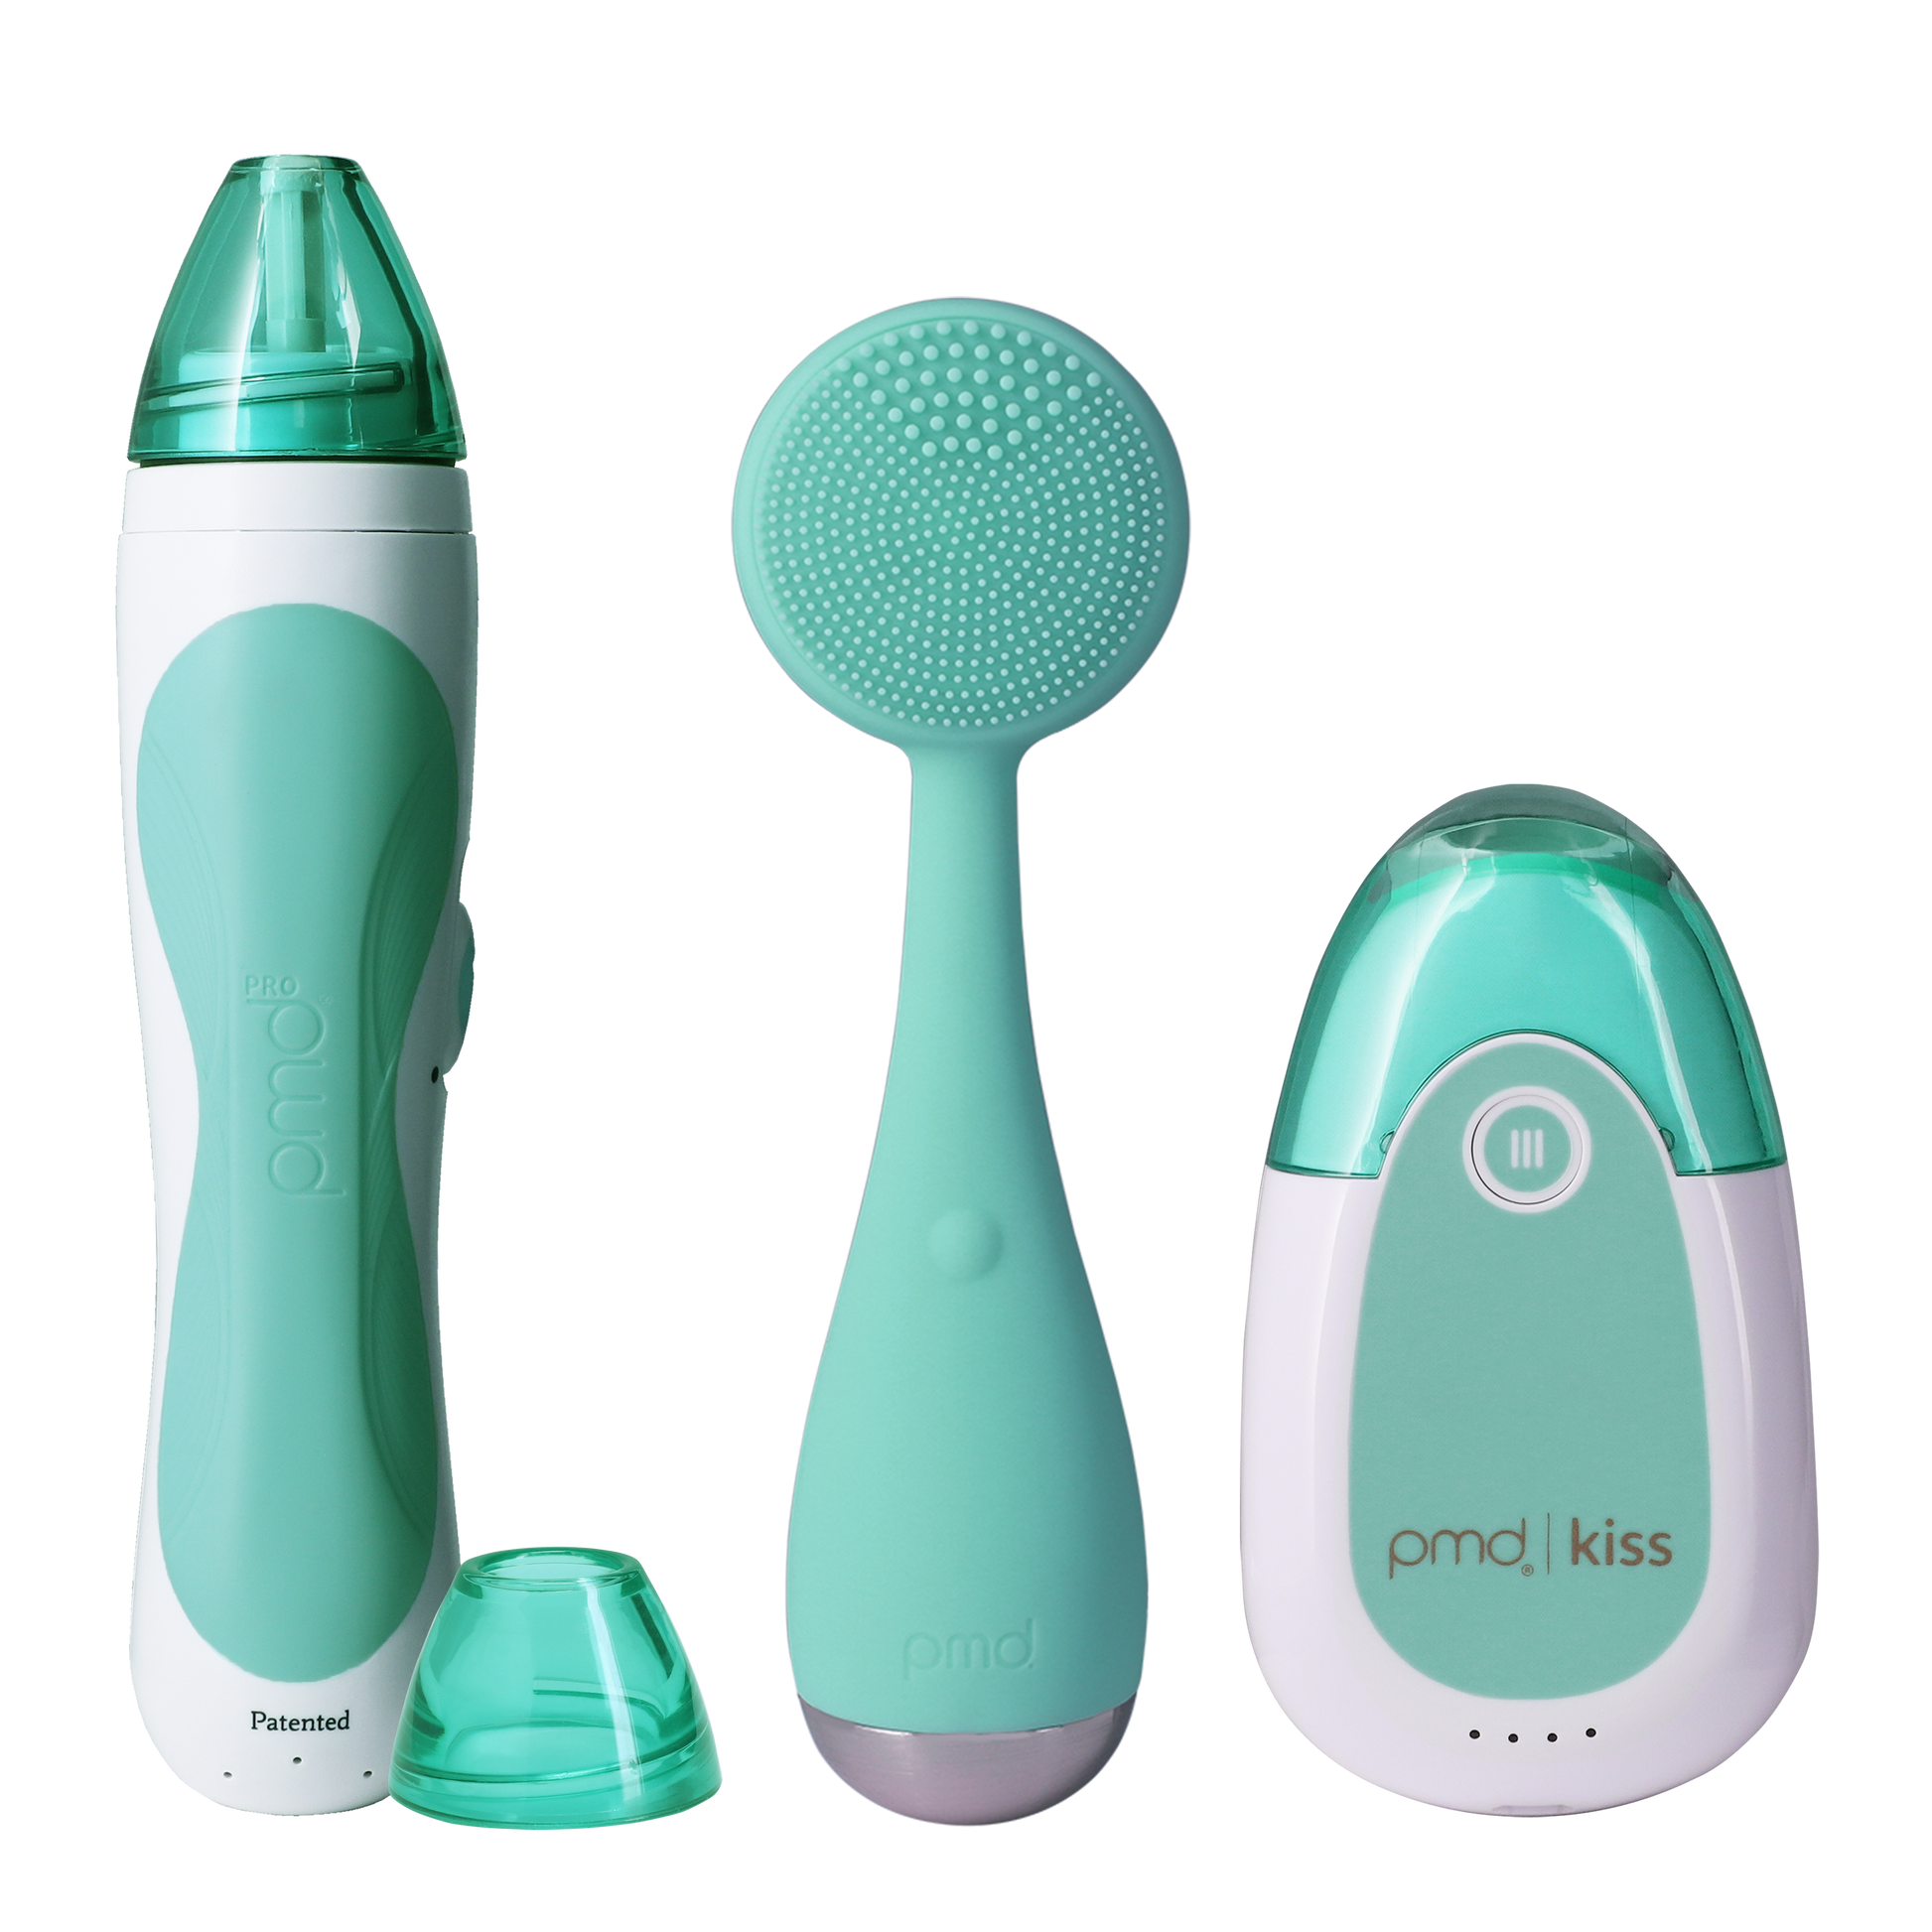 beauty_kit_teal_new?Personal Microderm Pro in Teal, PMD Kiss in Teal, and PMD Clean in Teal